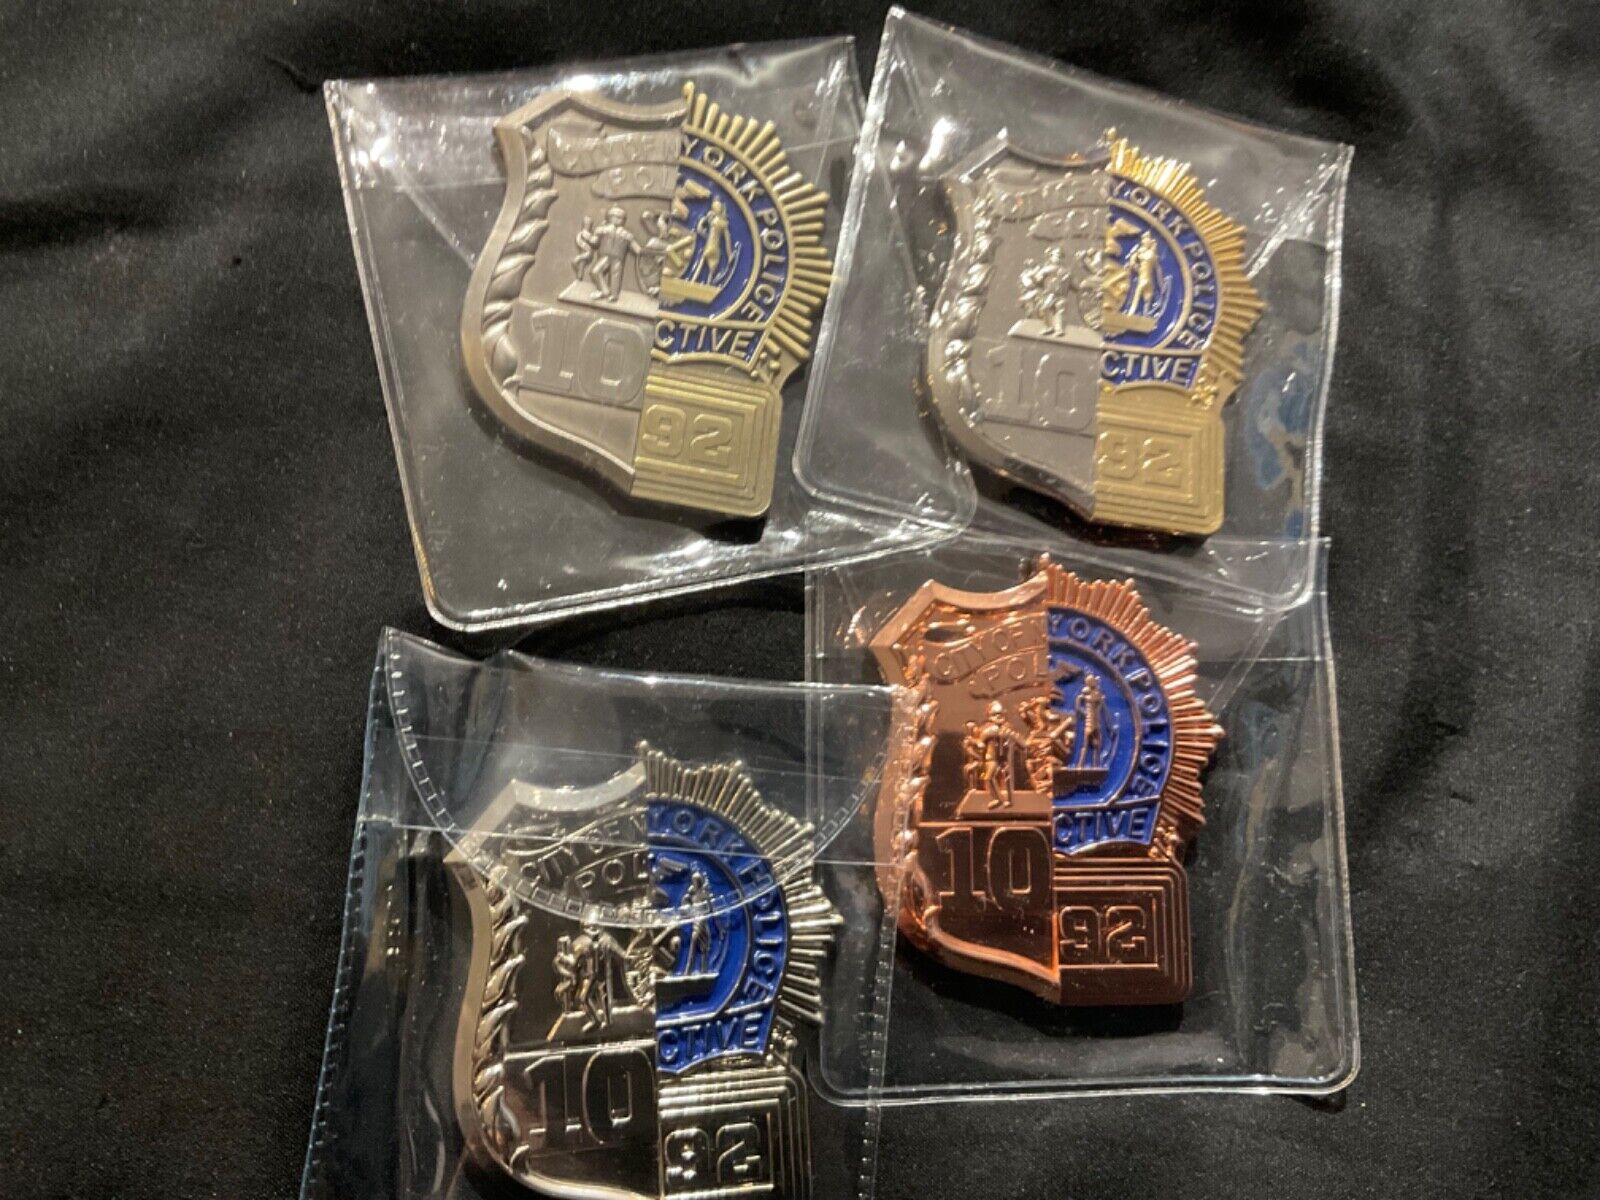 NYPD set of 4 CHROME 18TH MONTHS TO GOLD PATH DETECTIVE PATH CHALLENGE COIN